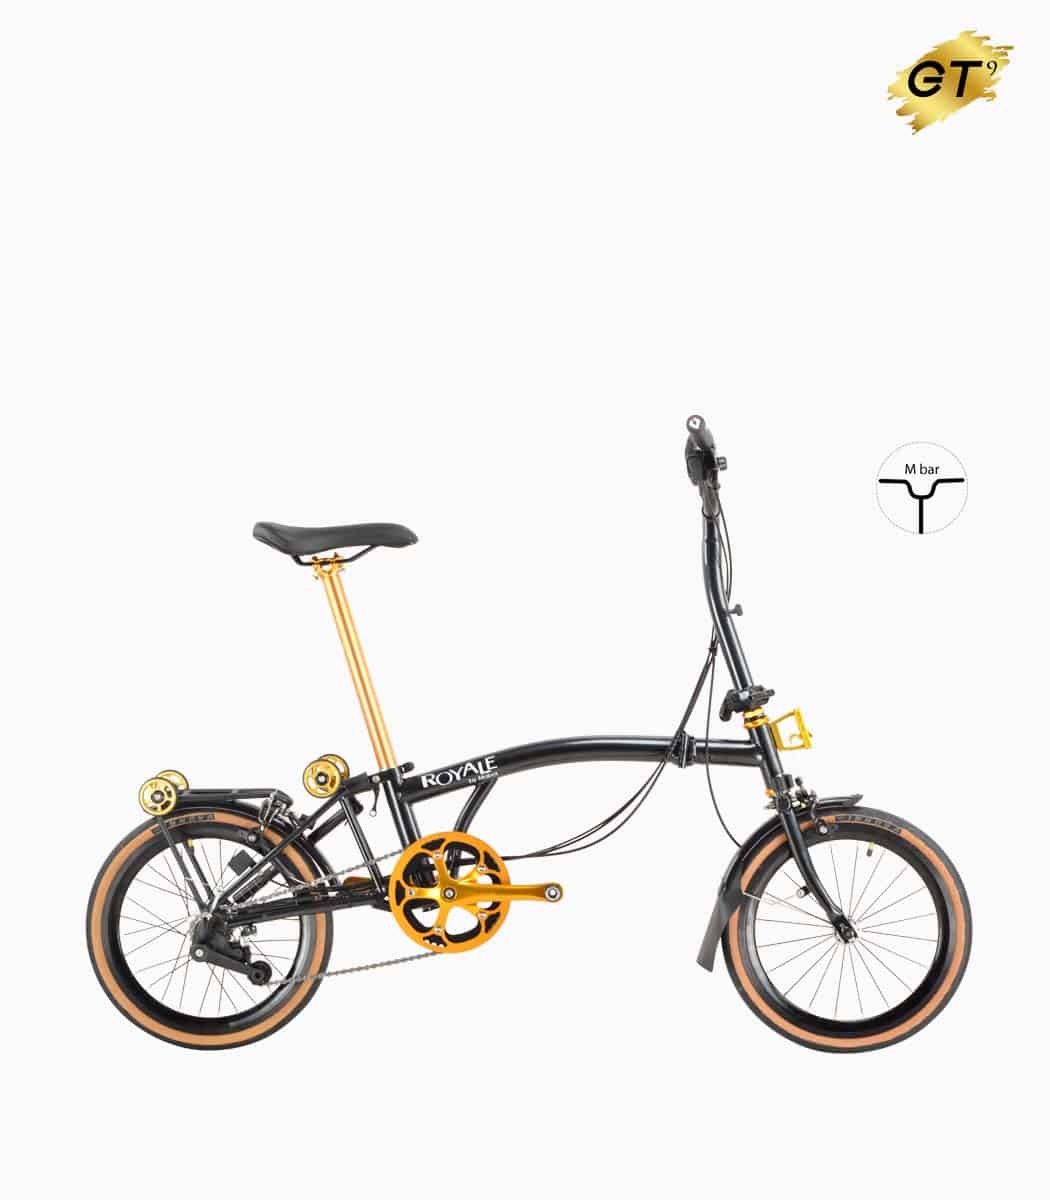 MOBOT ROYALE GT M9 (SPACE BLACK) foldable bicycle gold edition M-bar with tanwall tyres high profile rim right